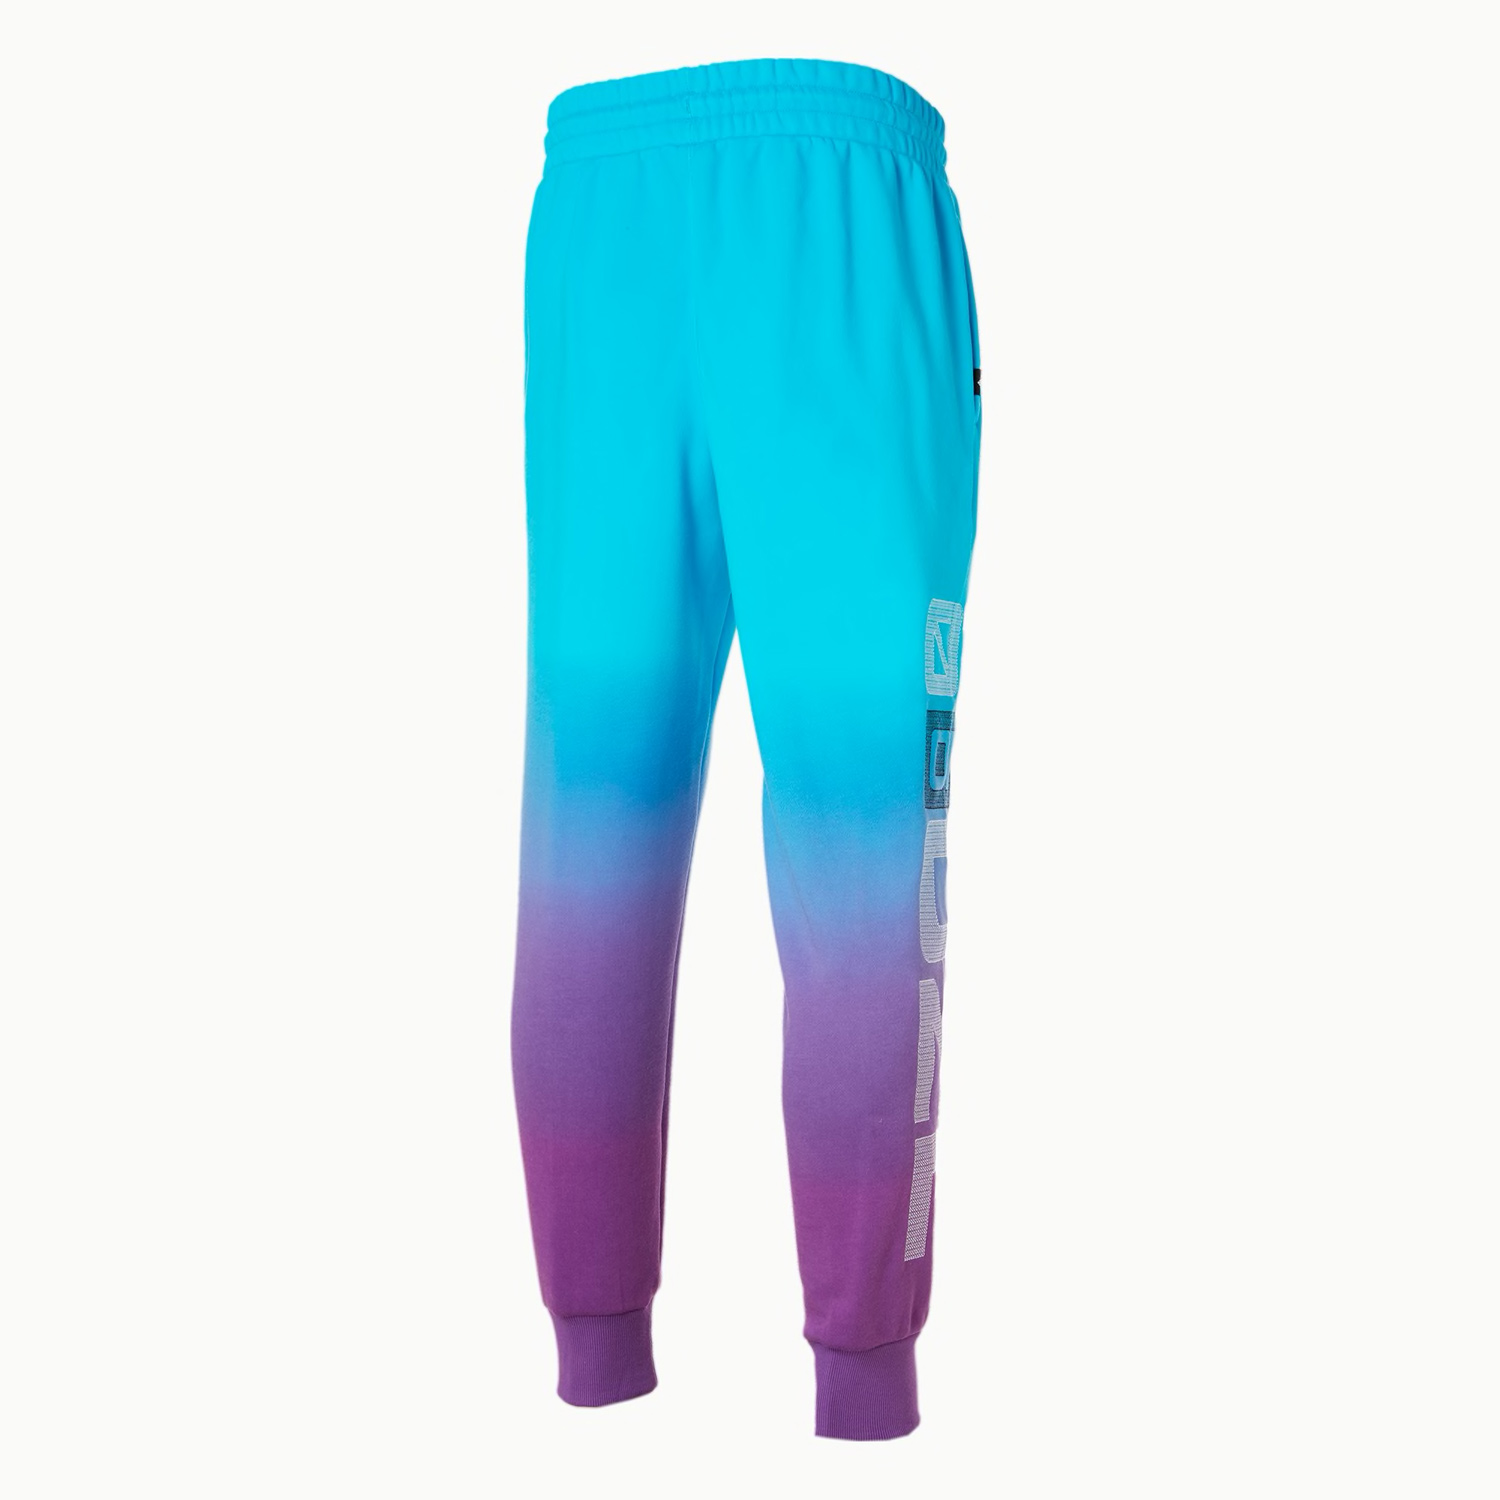 puma-melo-buzz-city-one-of-one-pants-2